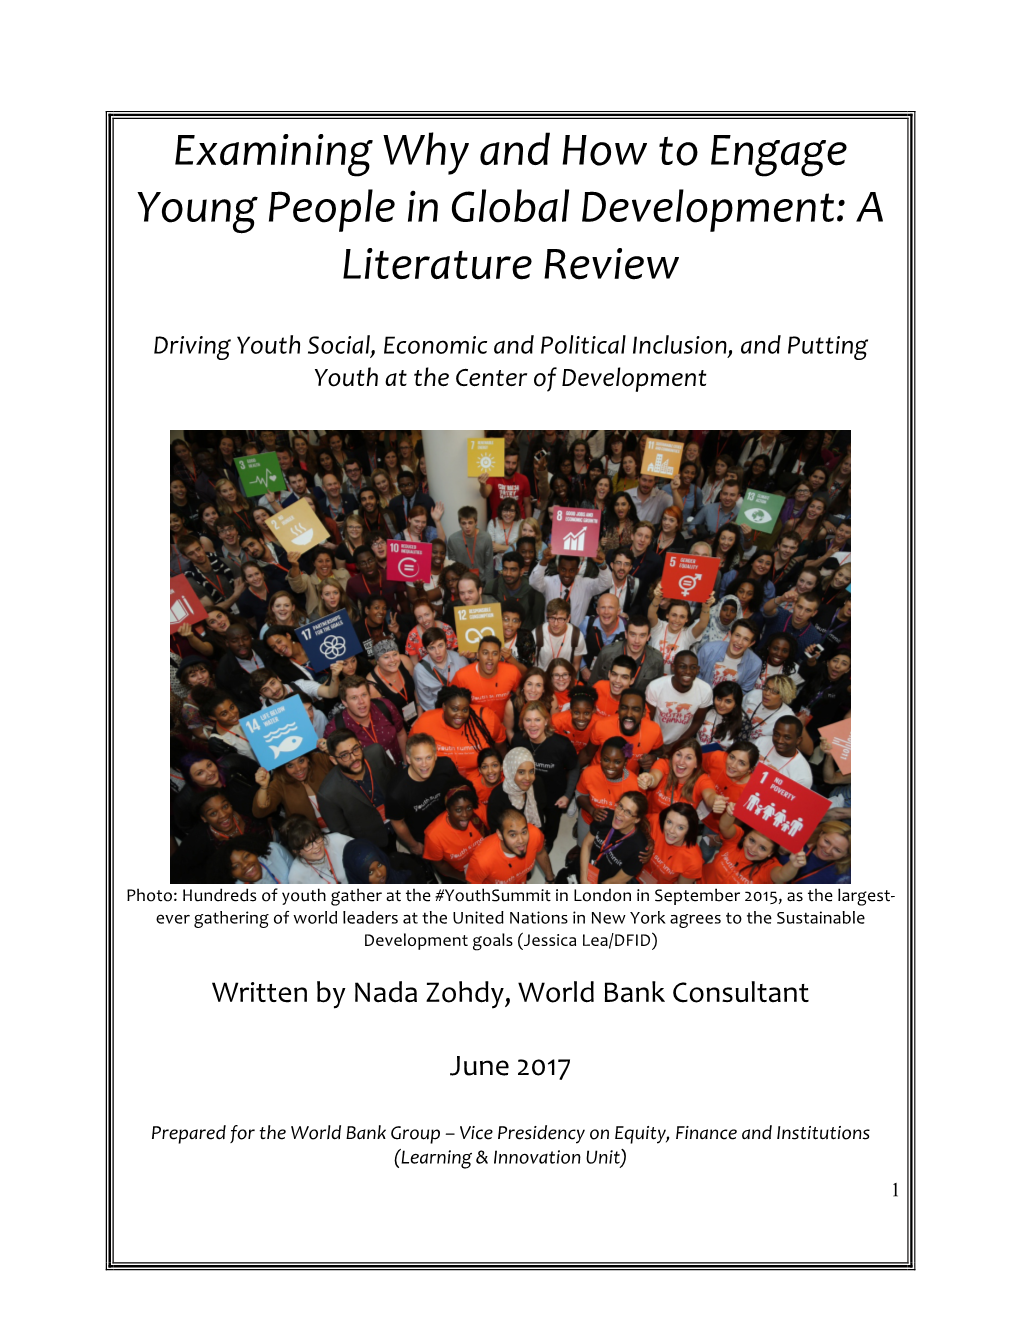 Examining Why and How to Engage Young People in Global Development: a Literature Review